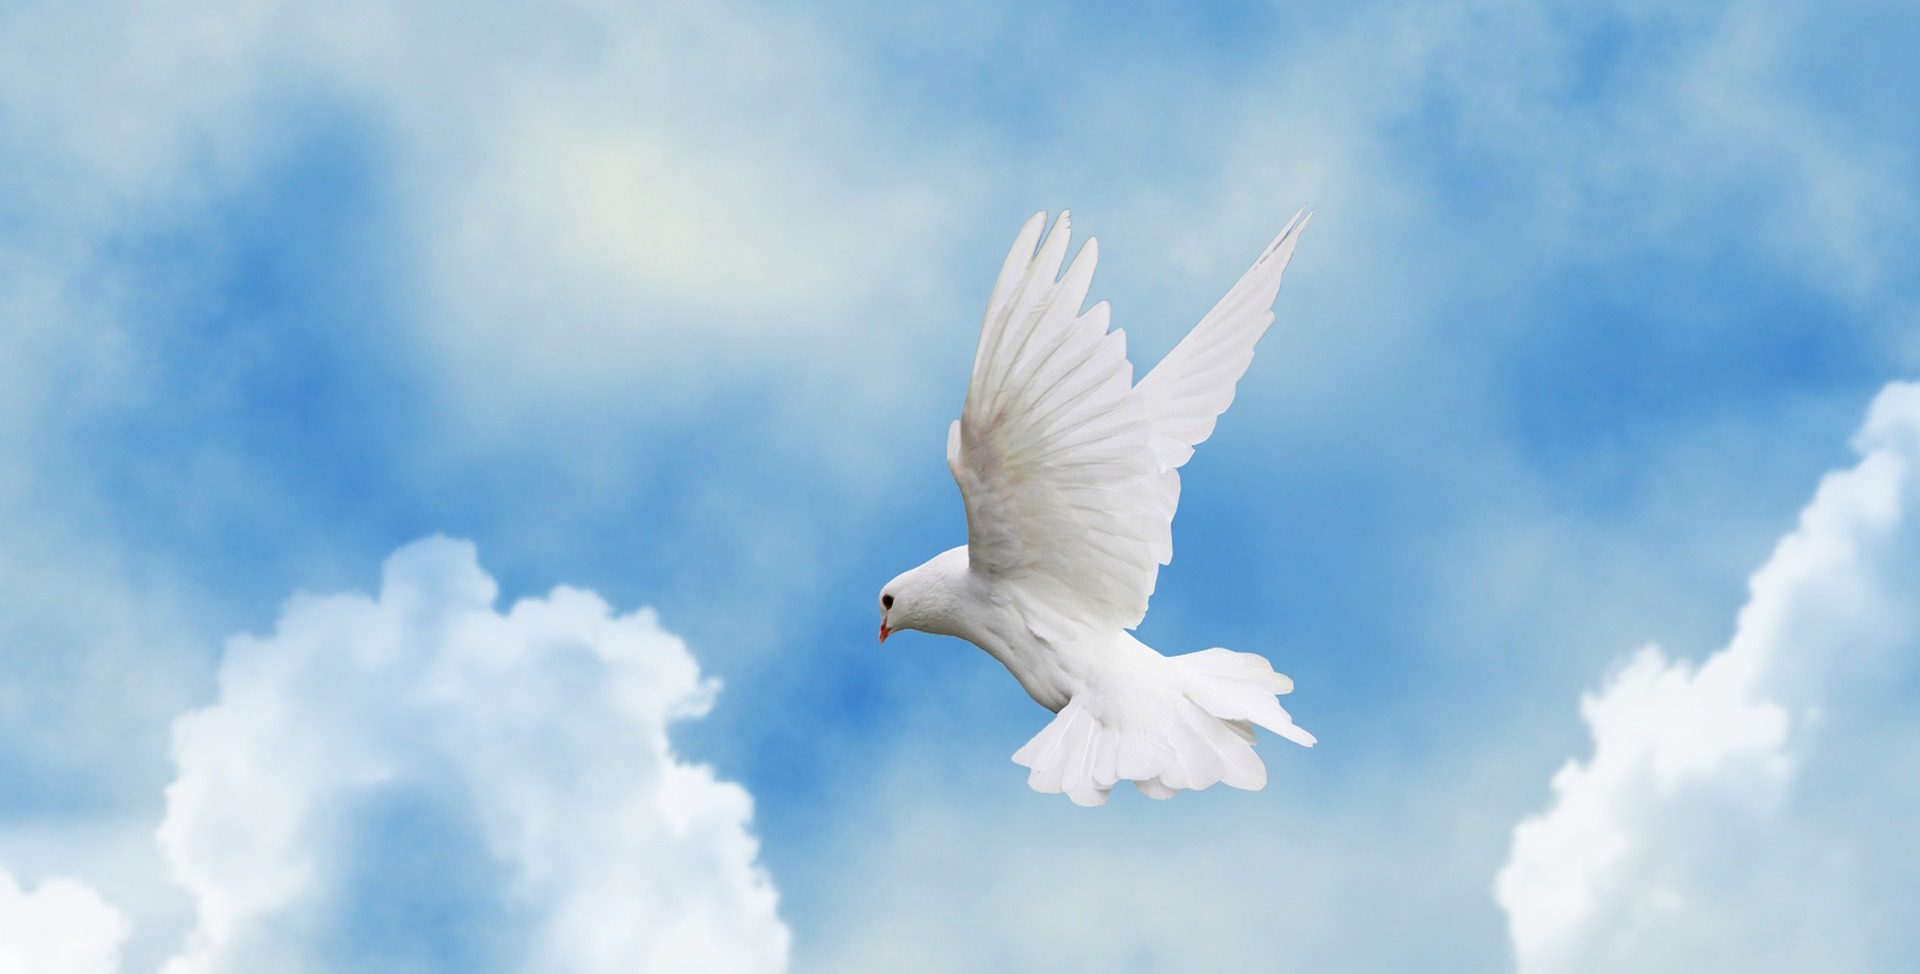 A white bird flying in the sky with clouds.